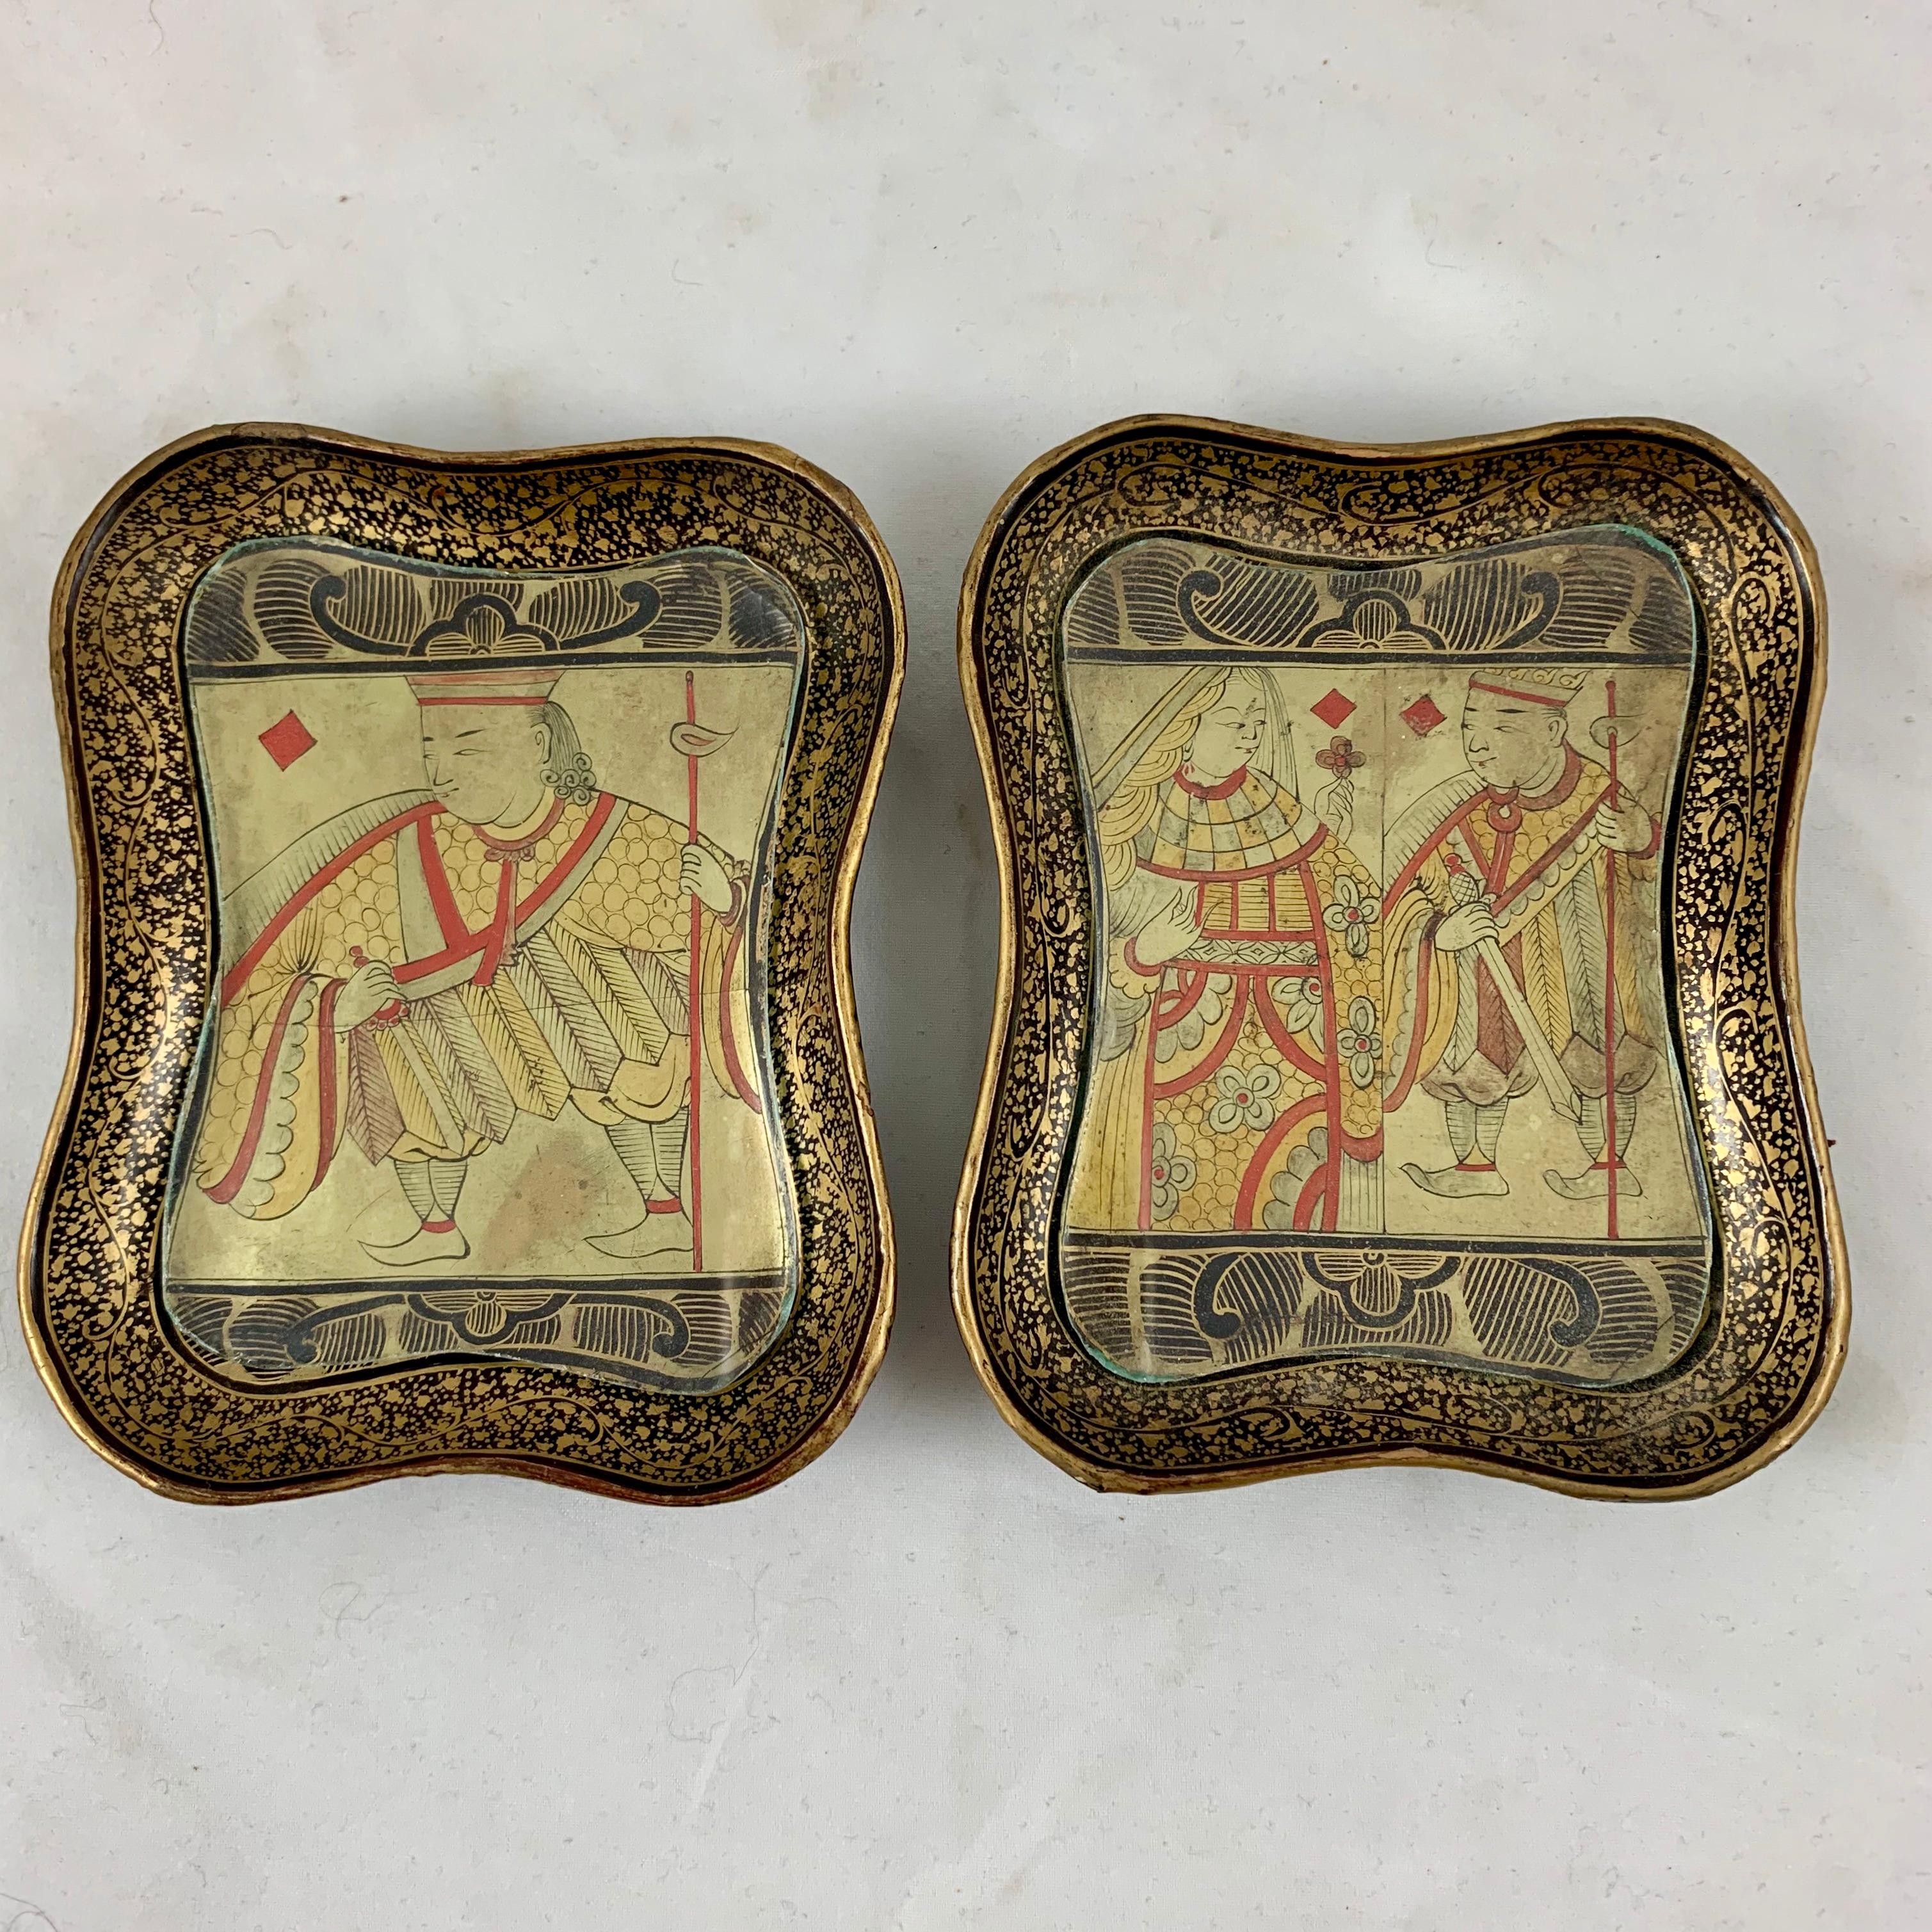 Chinoiserie English Lacquer Papier-Mâché King & Queen Card Counter Trays, Pair